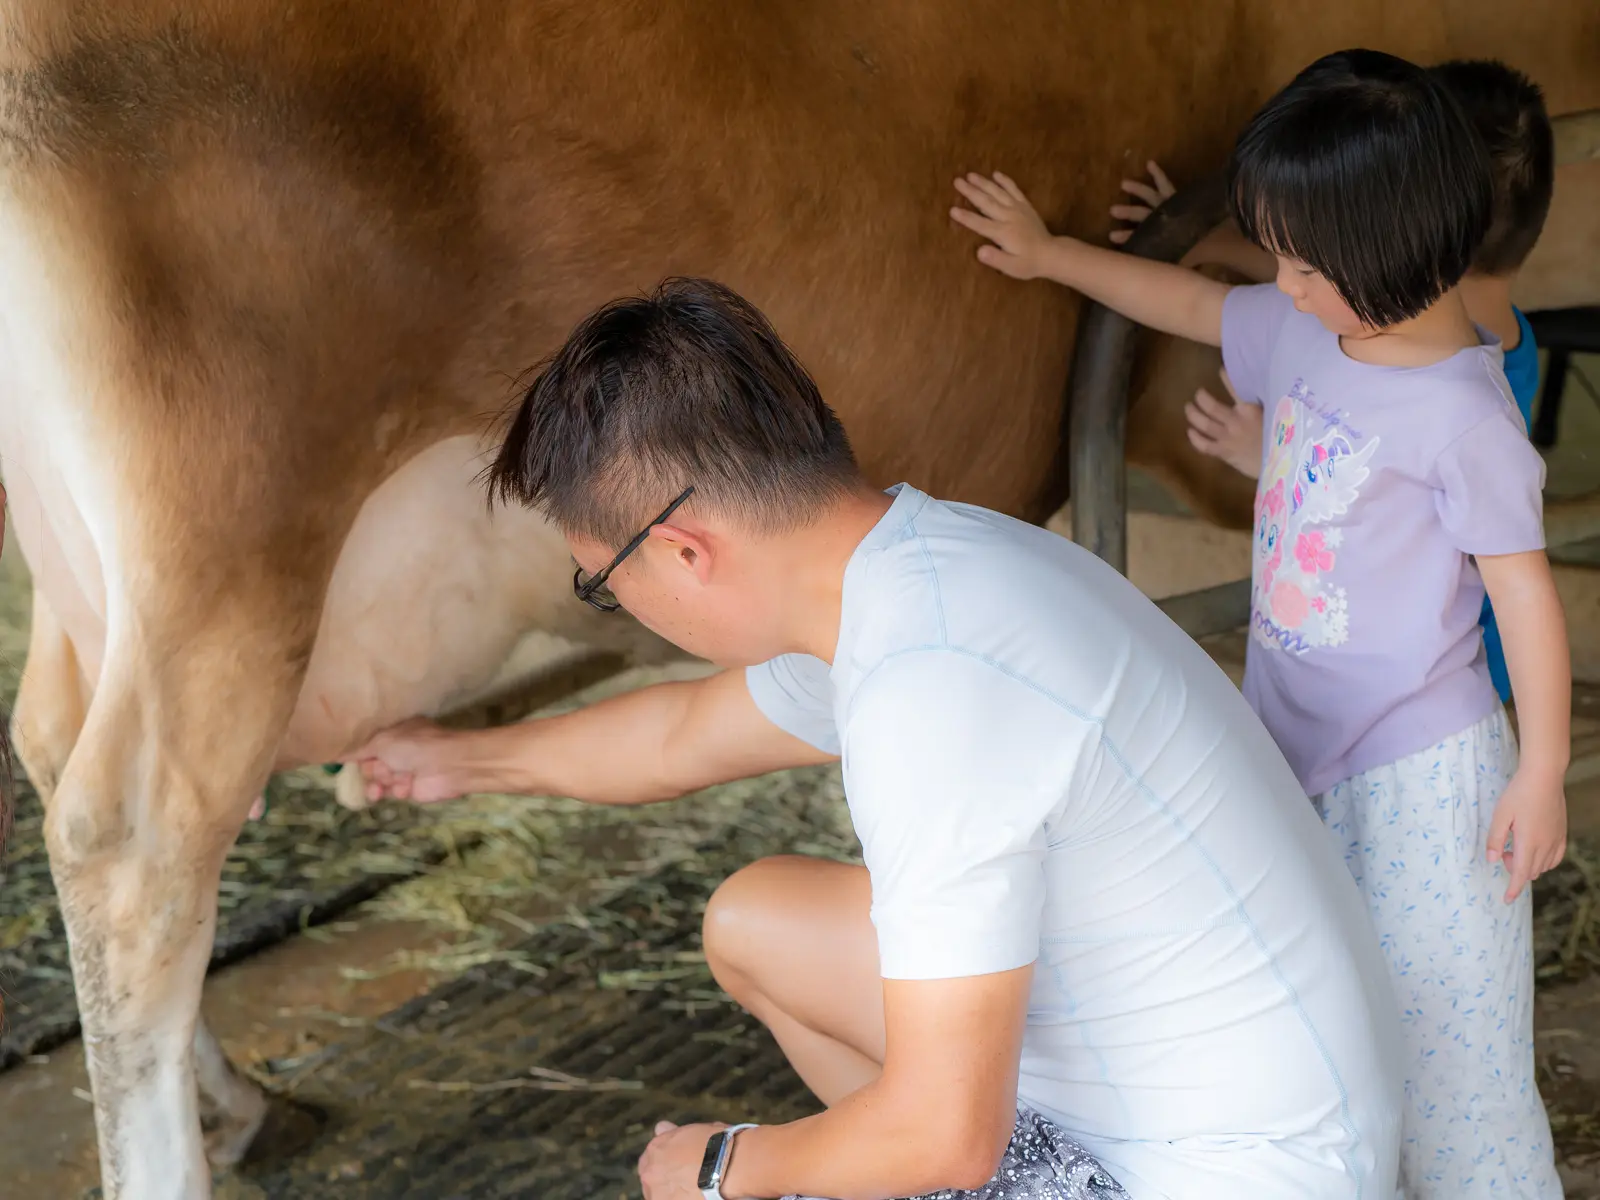 A father milks a cow while two young children pet it.